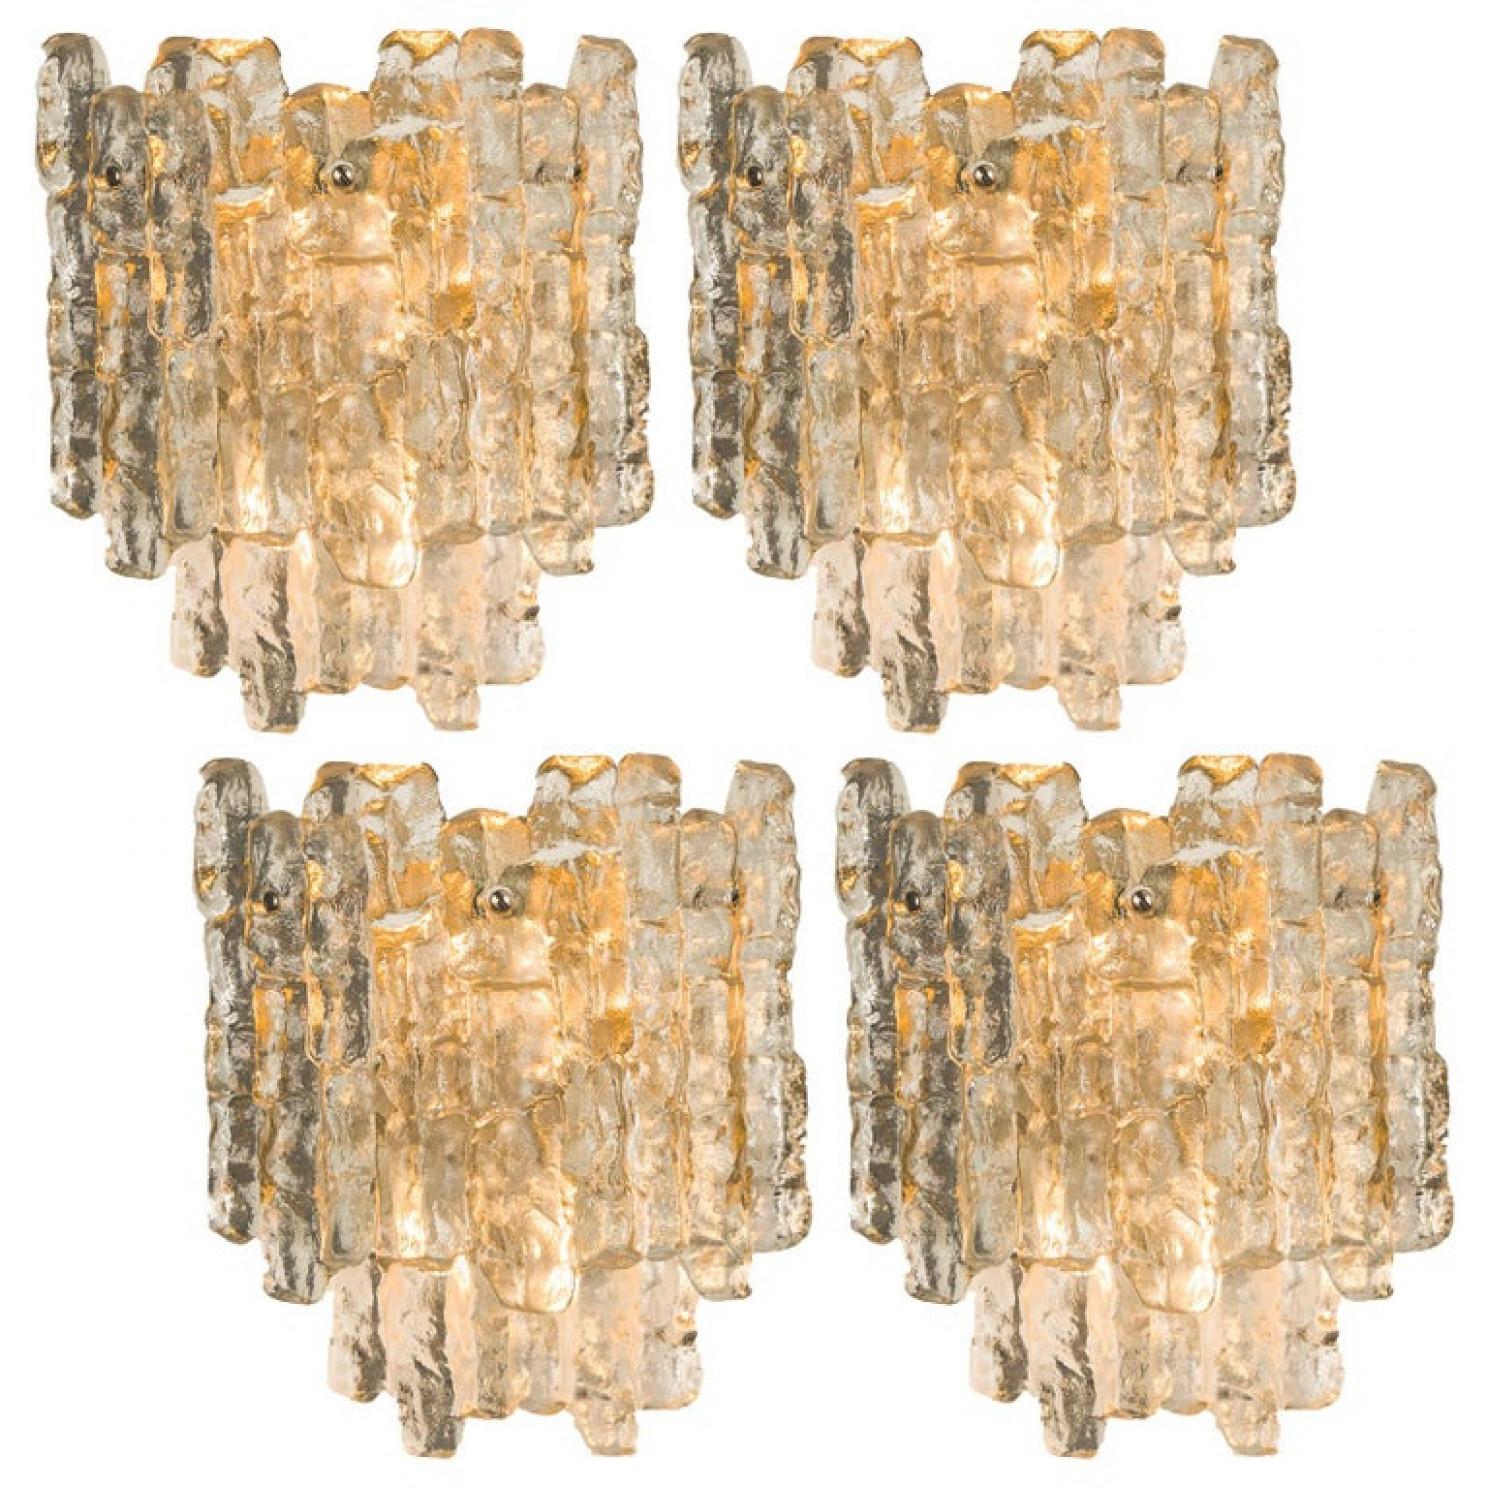 1 of the 2 Exceptional Huge Glass Flush Mount /Chandeliers by J.T. Kalmar, 1960s For Sale 3